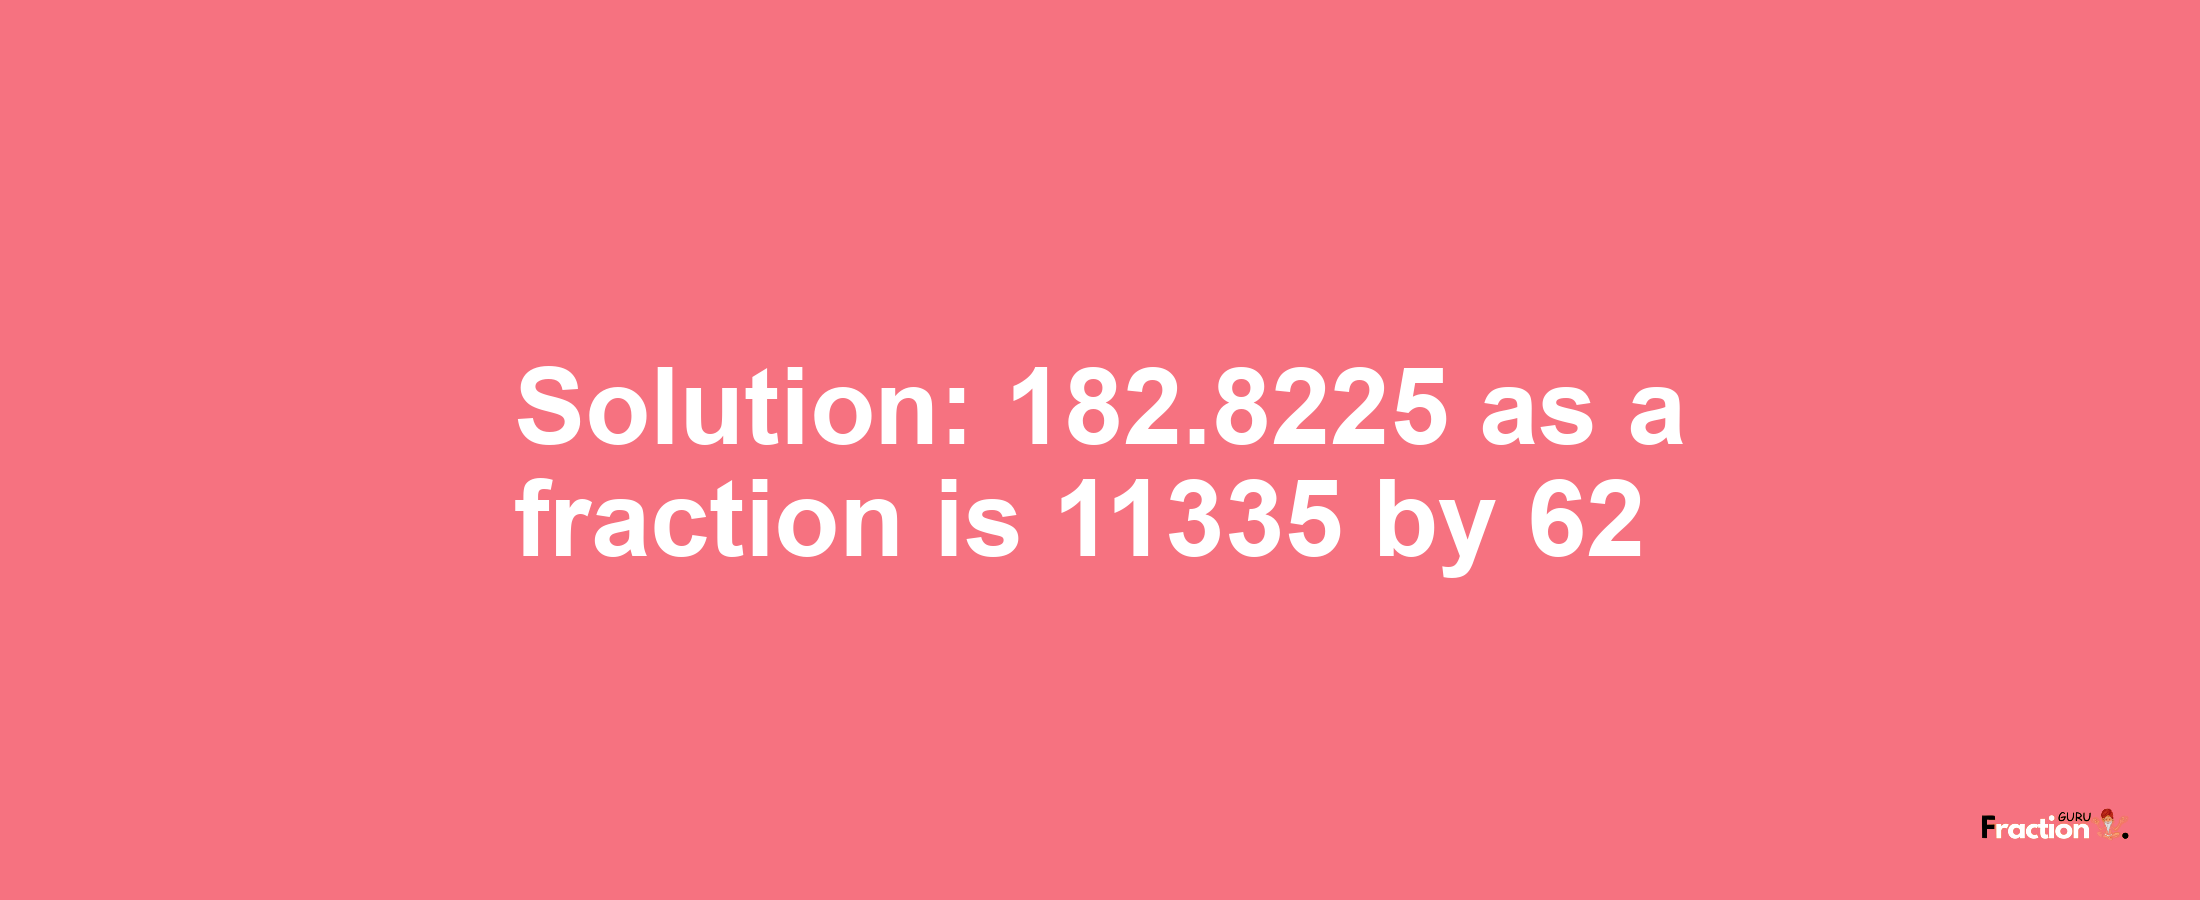 Solution:182.8225 as a fraction is 11335/62